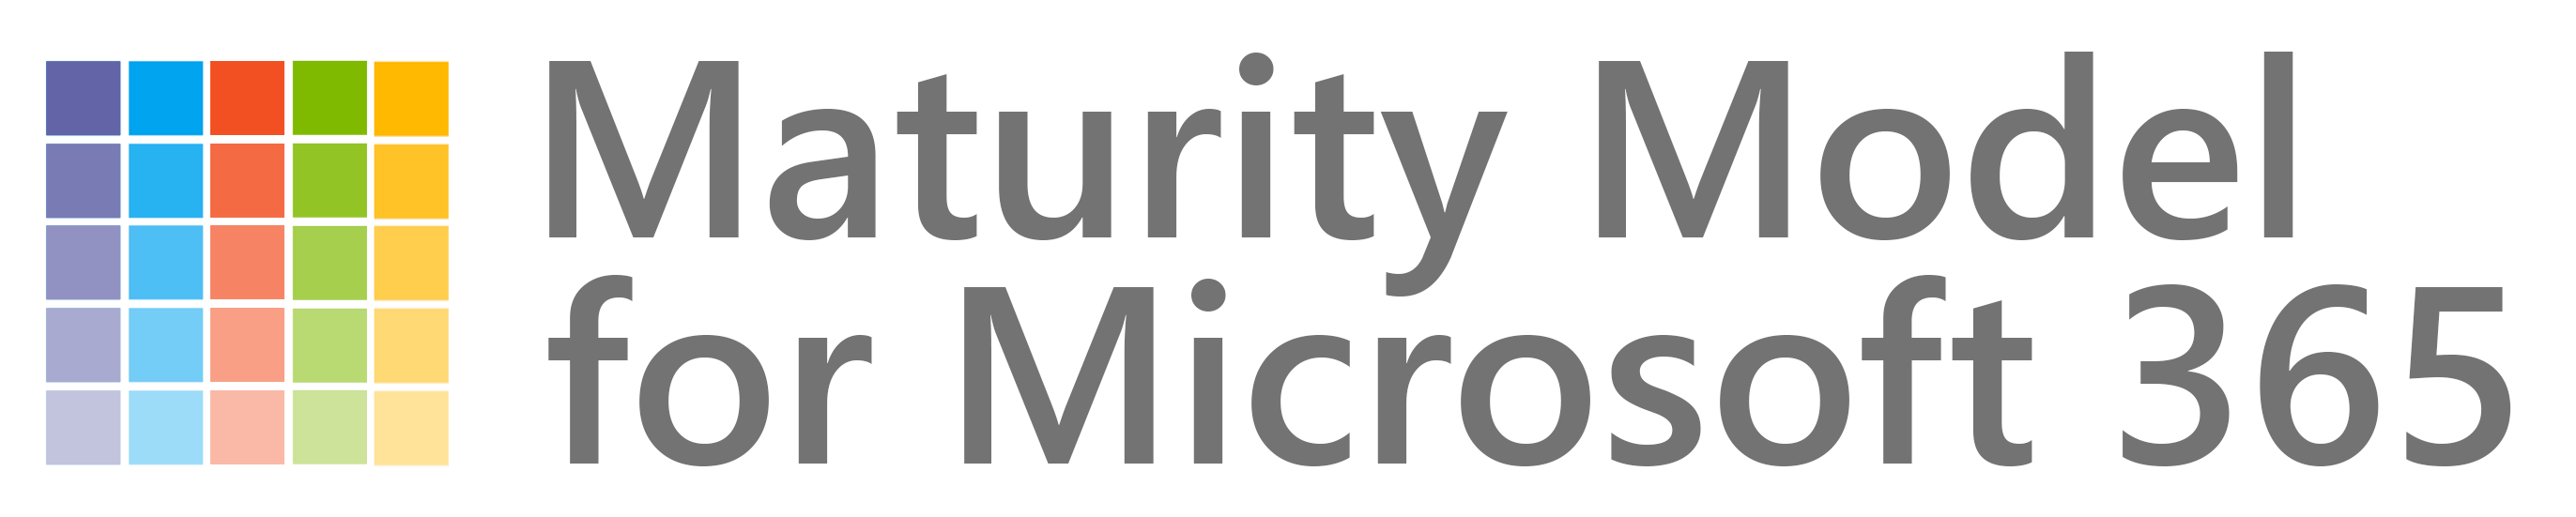 Image of the Maturity Model for Microsoft 365 logo.